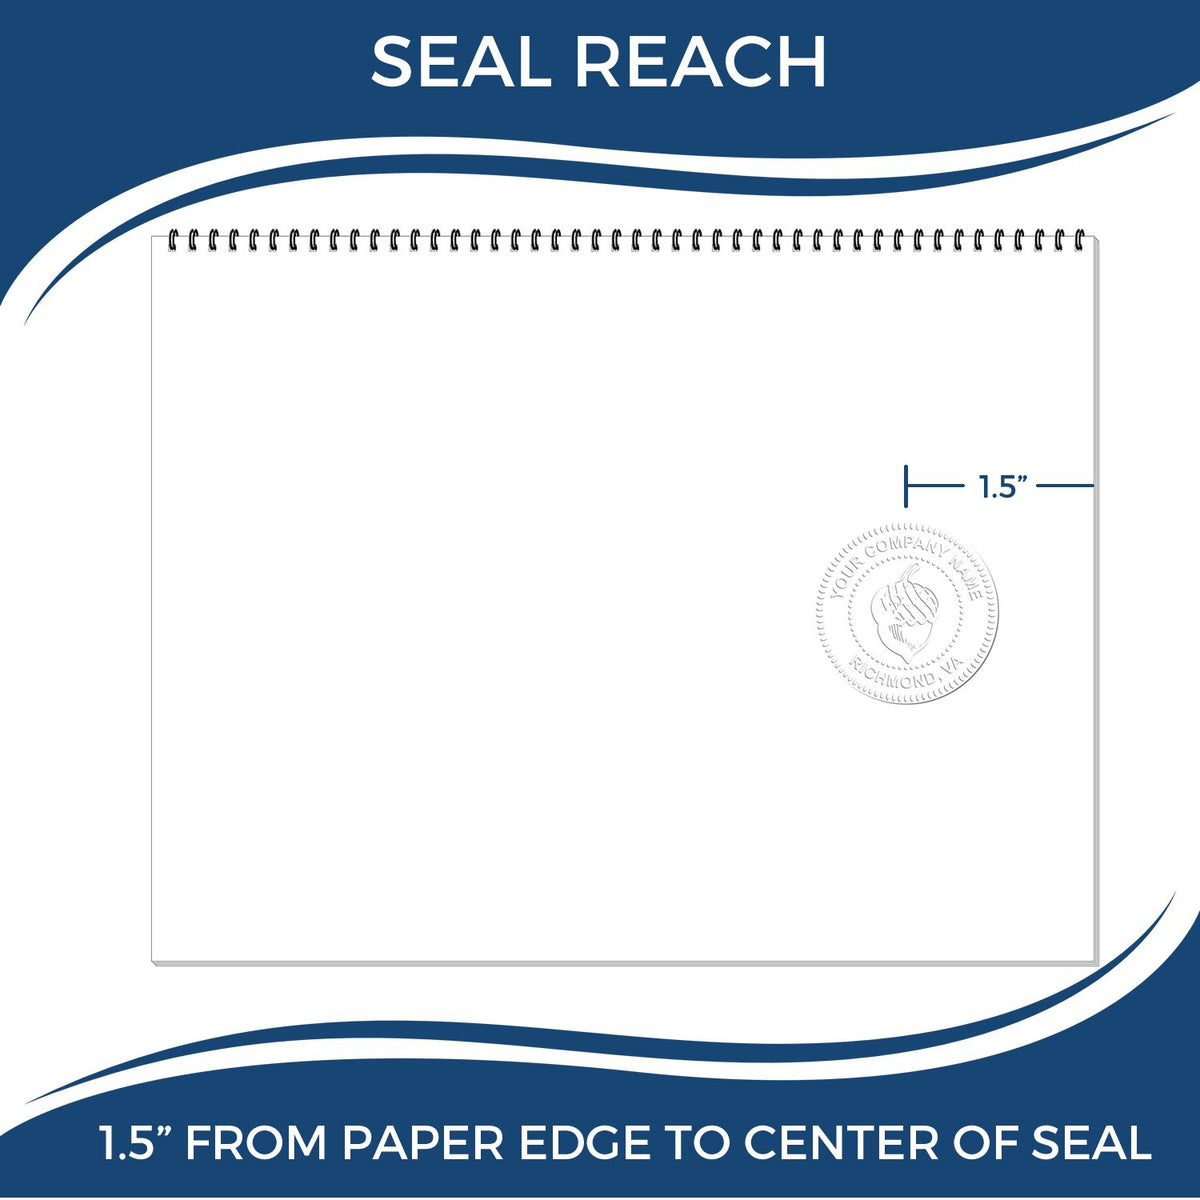 An infographic showing the seal reach which is represented by a ruler and a miniature seal image of the Gift Montana Engineer Seal